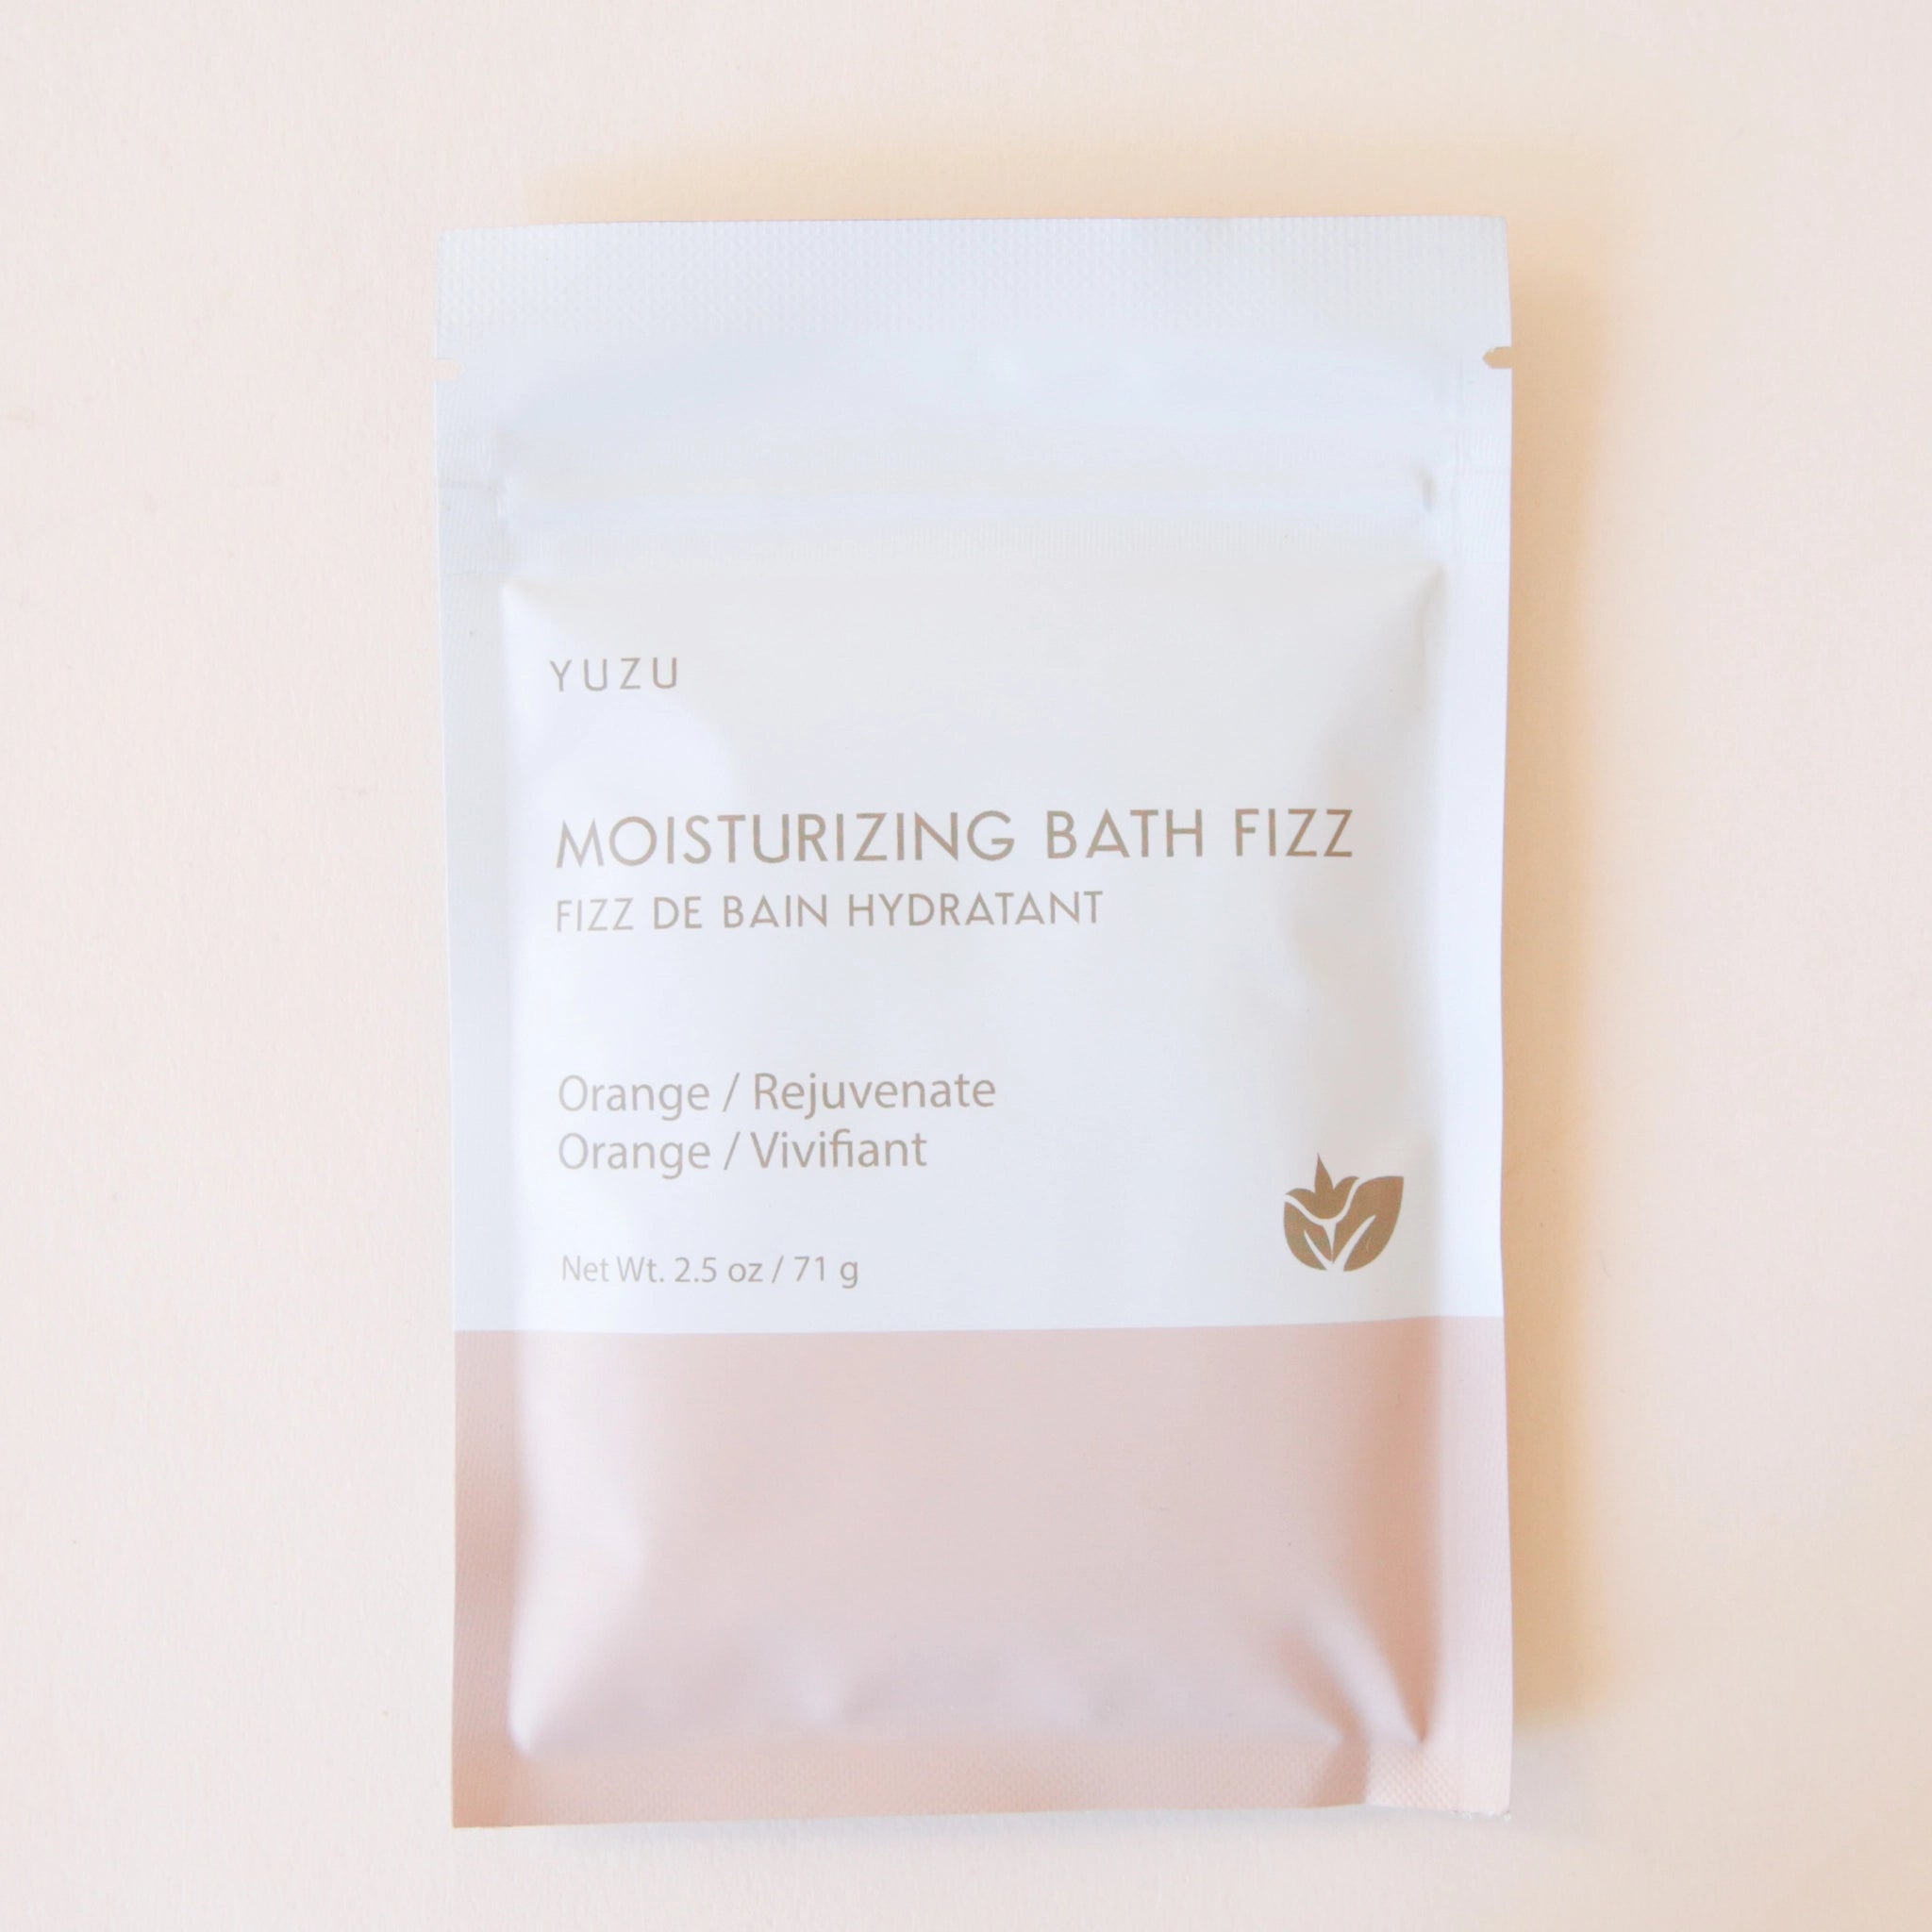 A packet of bath salts with the bottom half a light pink color and the top half white along with text on the front that reads, &quot;Moisturizing Bath Fizz, Orange / Rejuvenate&quot;.